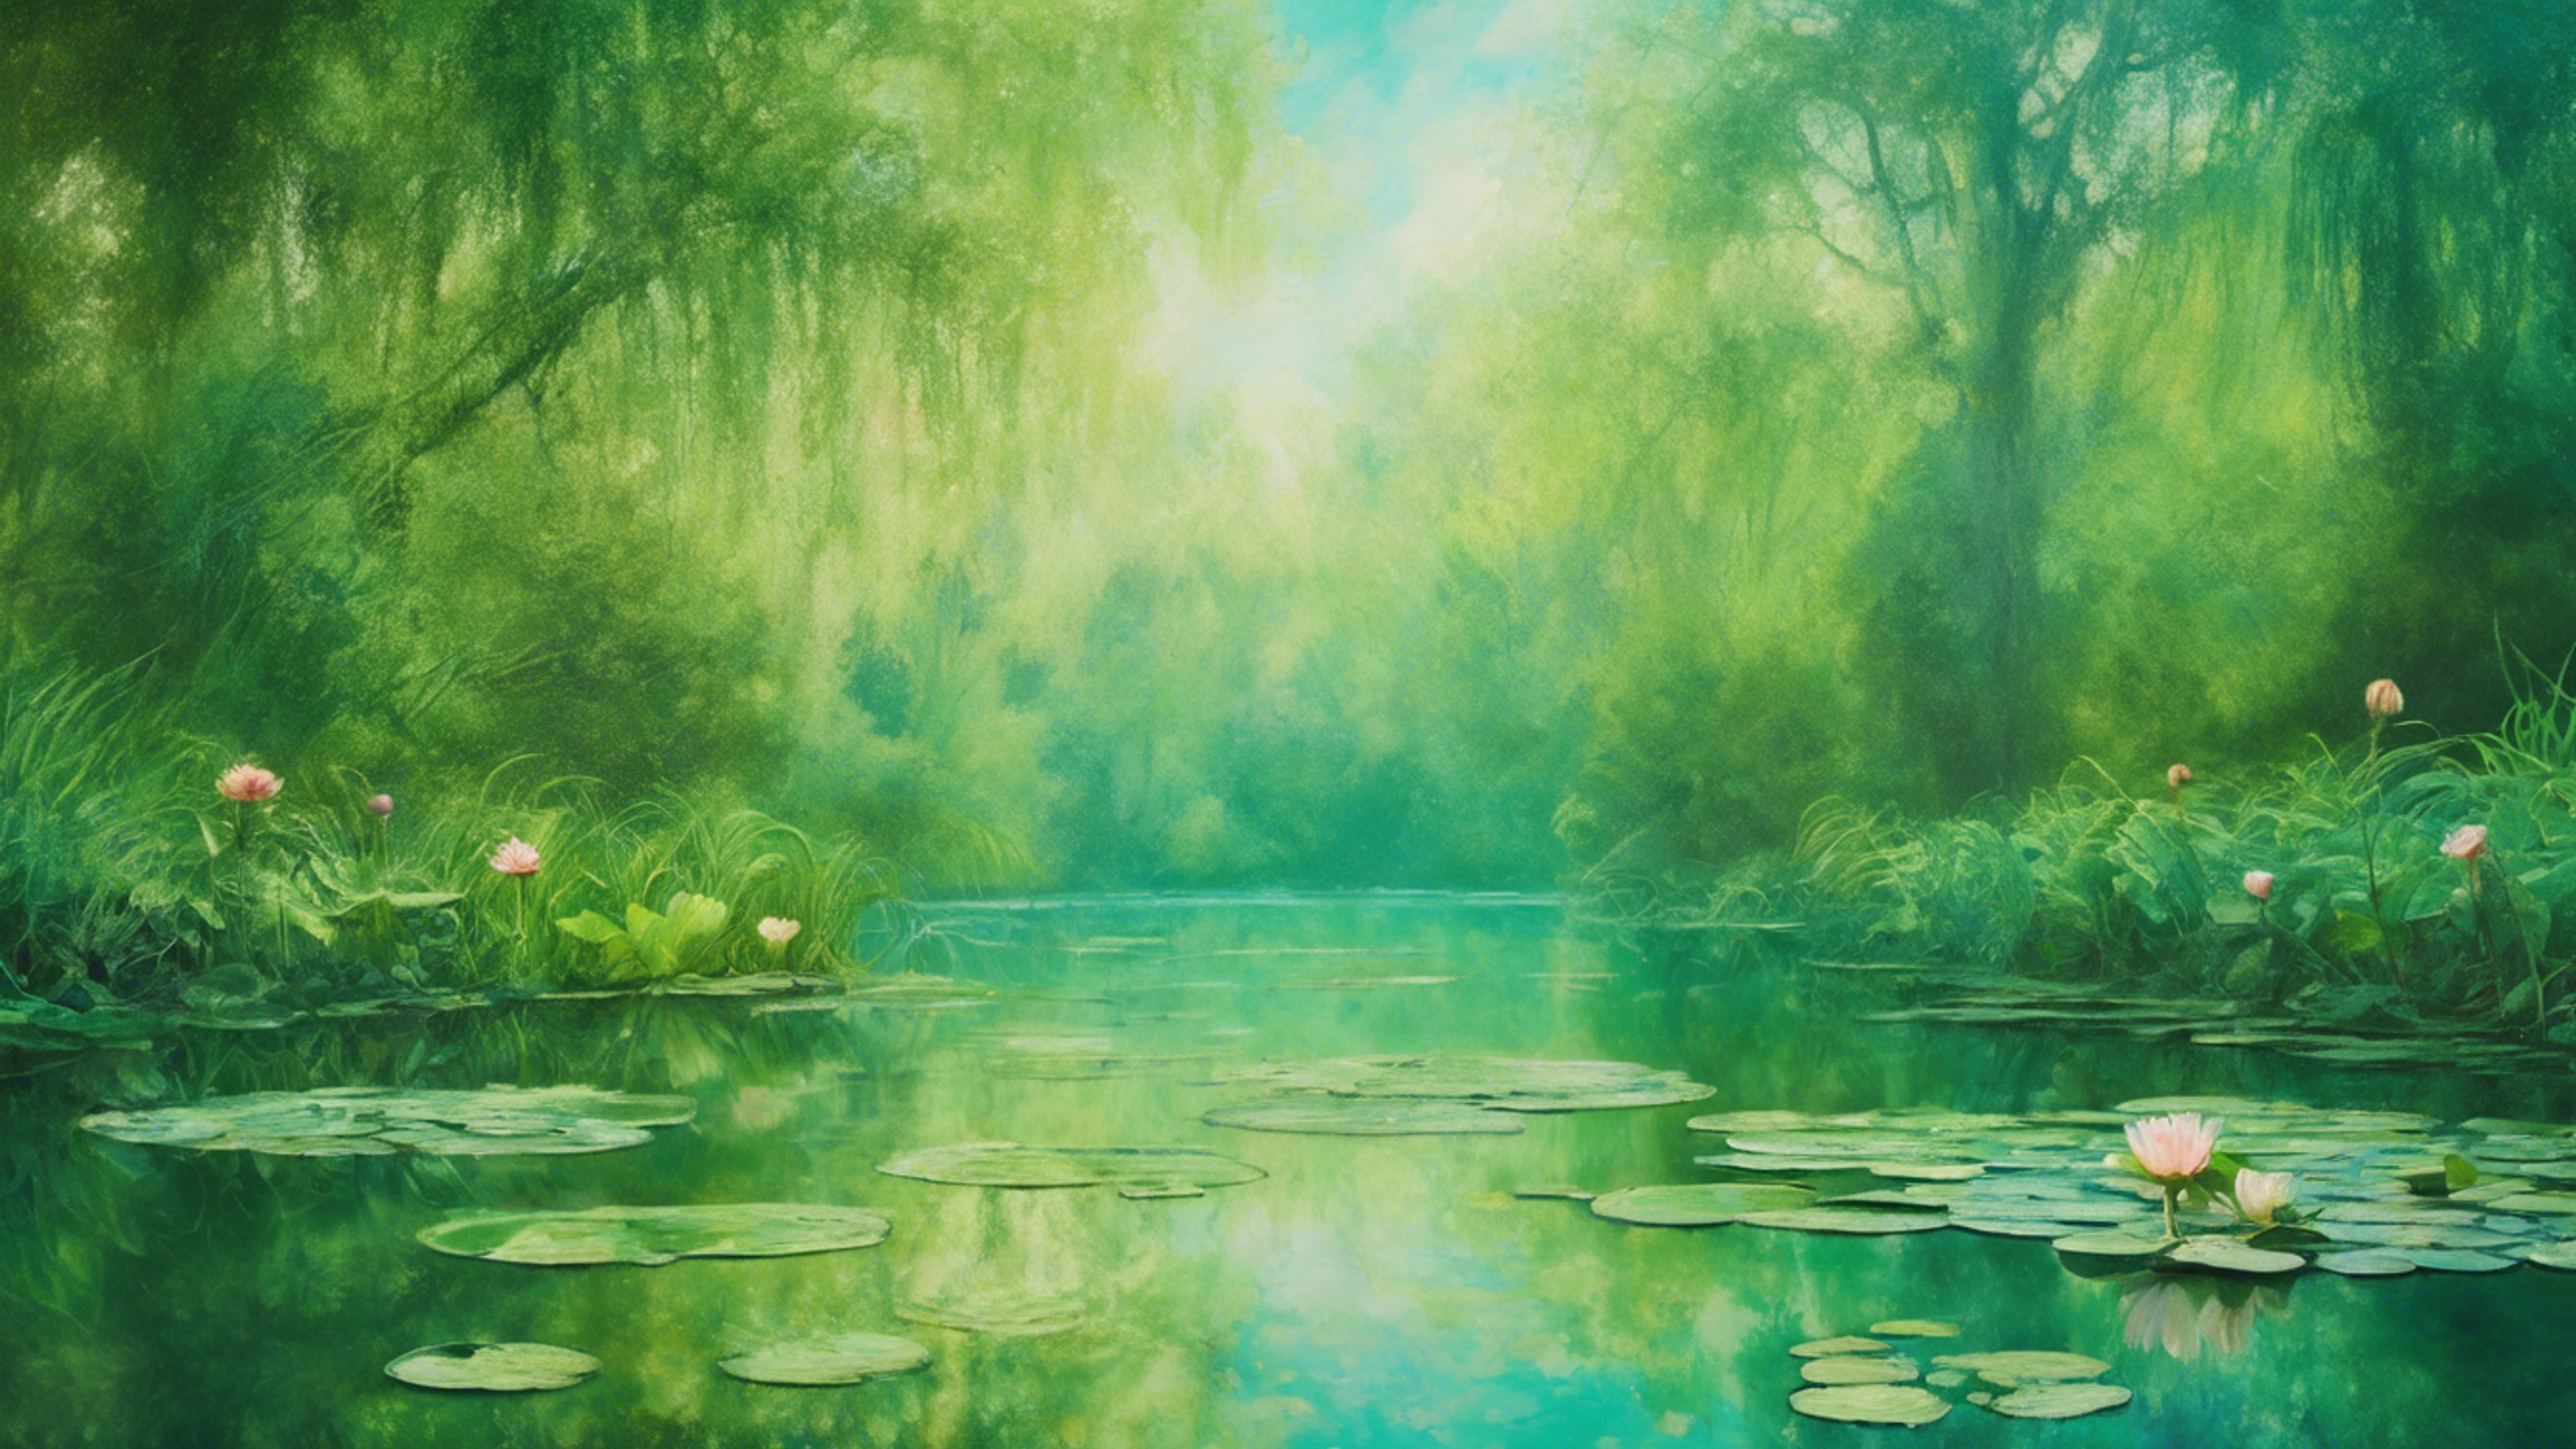 A landscape painting inspired by Monet's Water Lilies, with cool green hues. Wallpaper[9f0abb477fe746e08ba1]